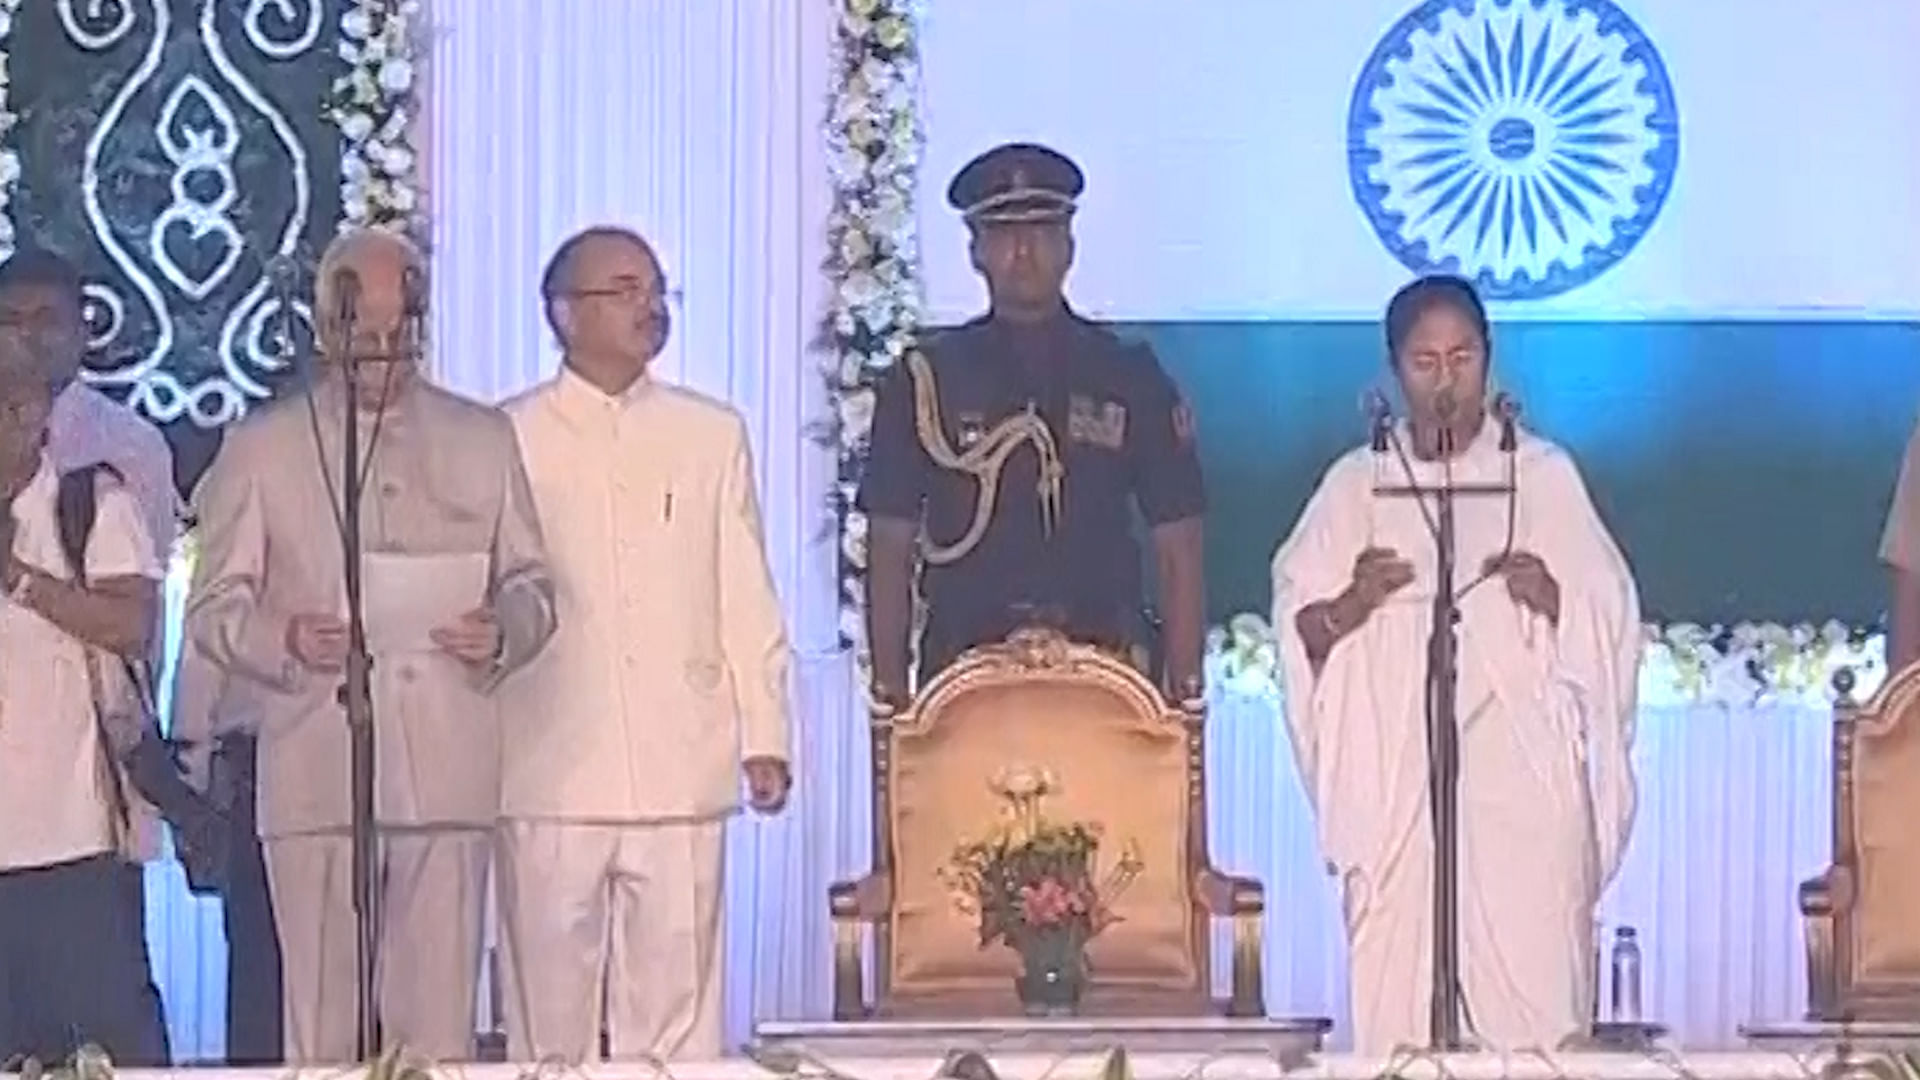  Mamata Banerjee being sworn as the chief minister of West Bengal in by West Bengal Governor Kesari Nath Tripathi. (Photo: ANI Screengrab)